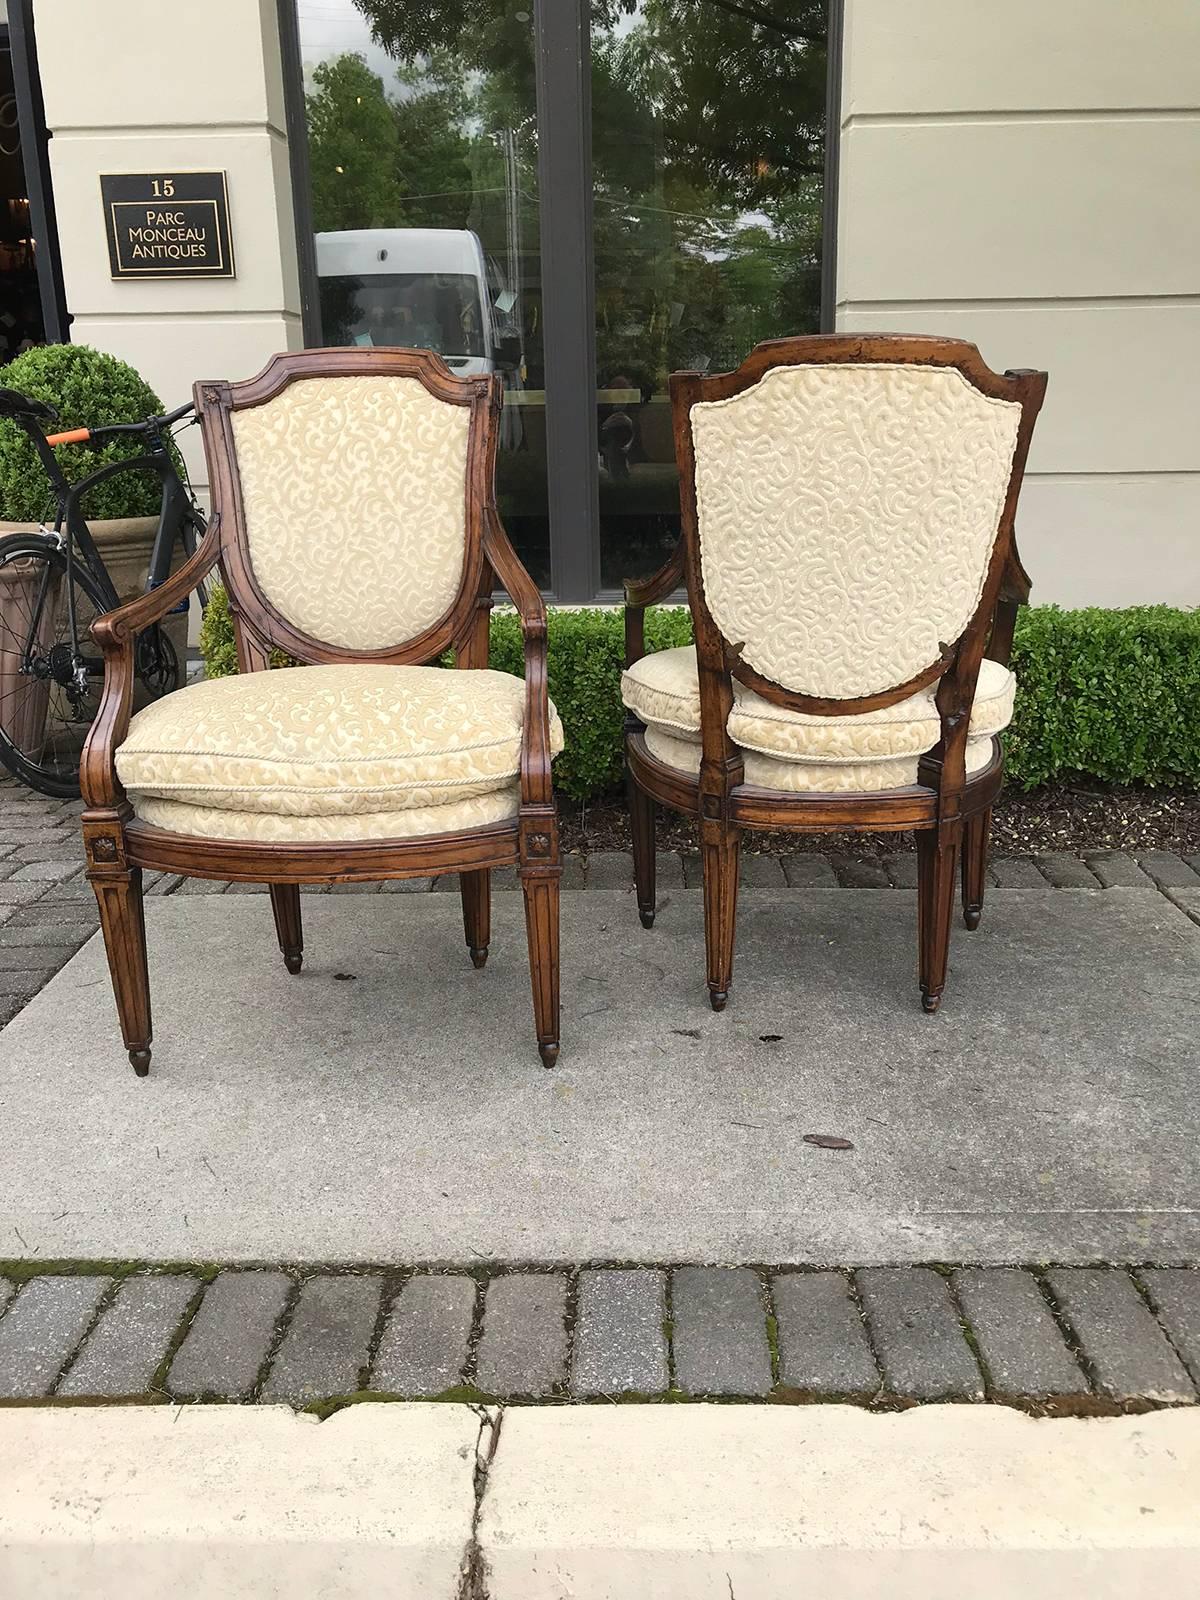 Pair of 19th century Italian Directoire style armchairs, shield back.